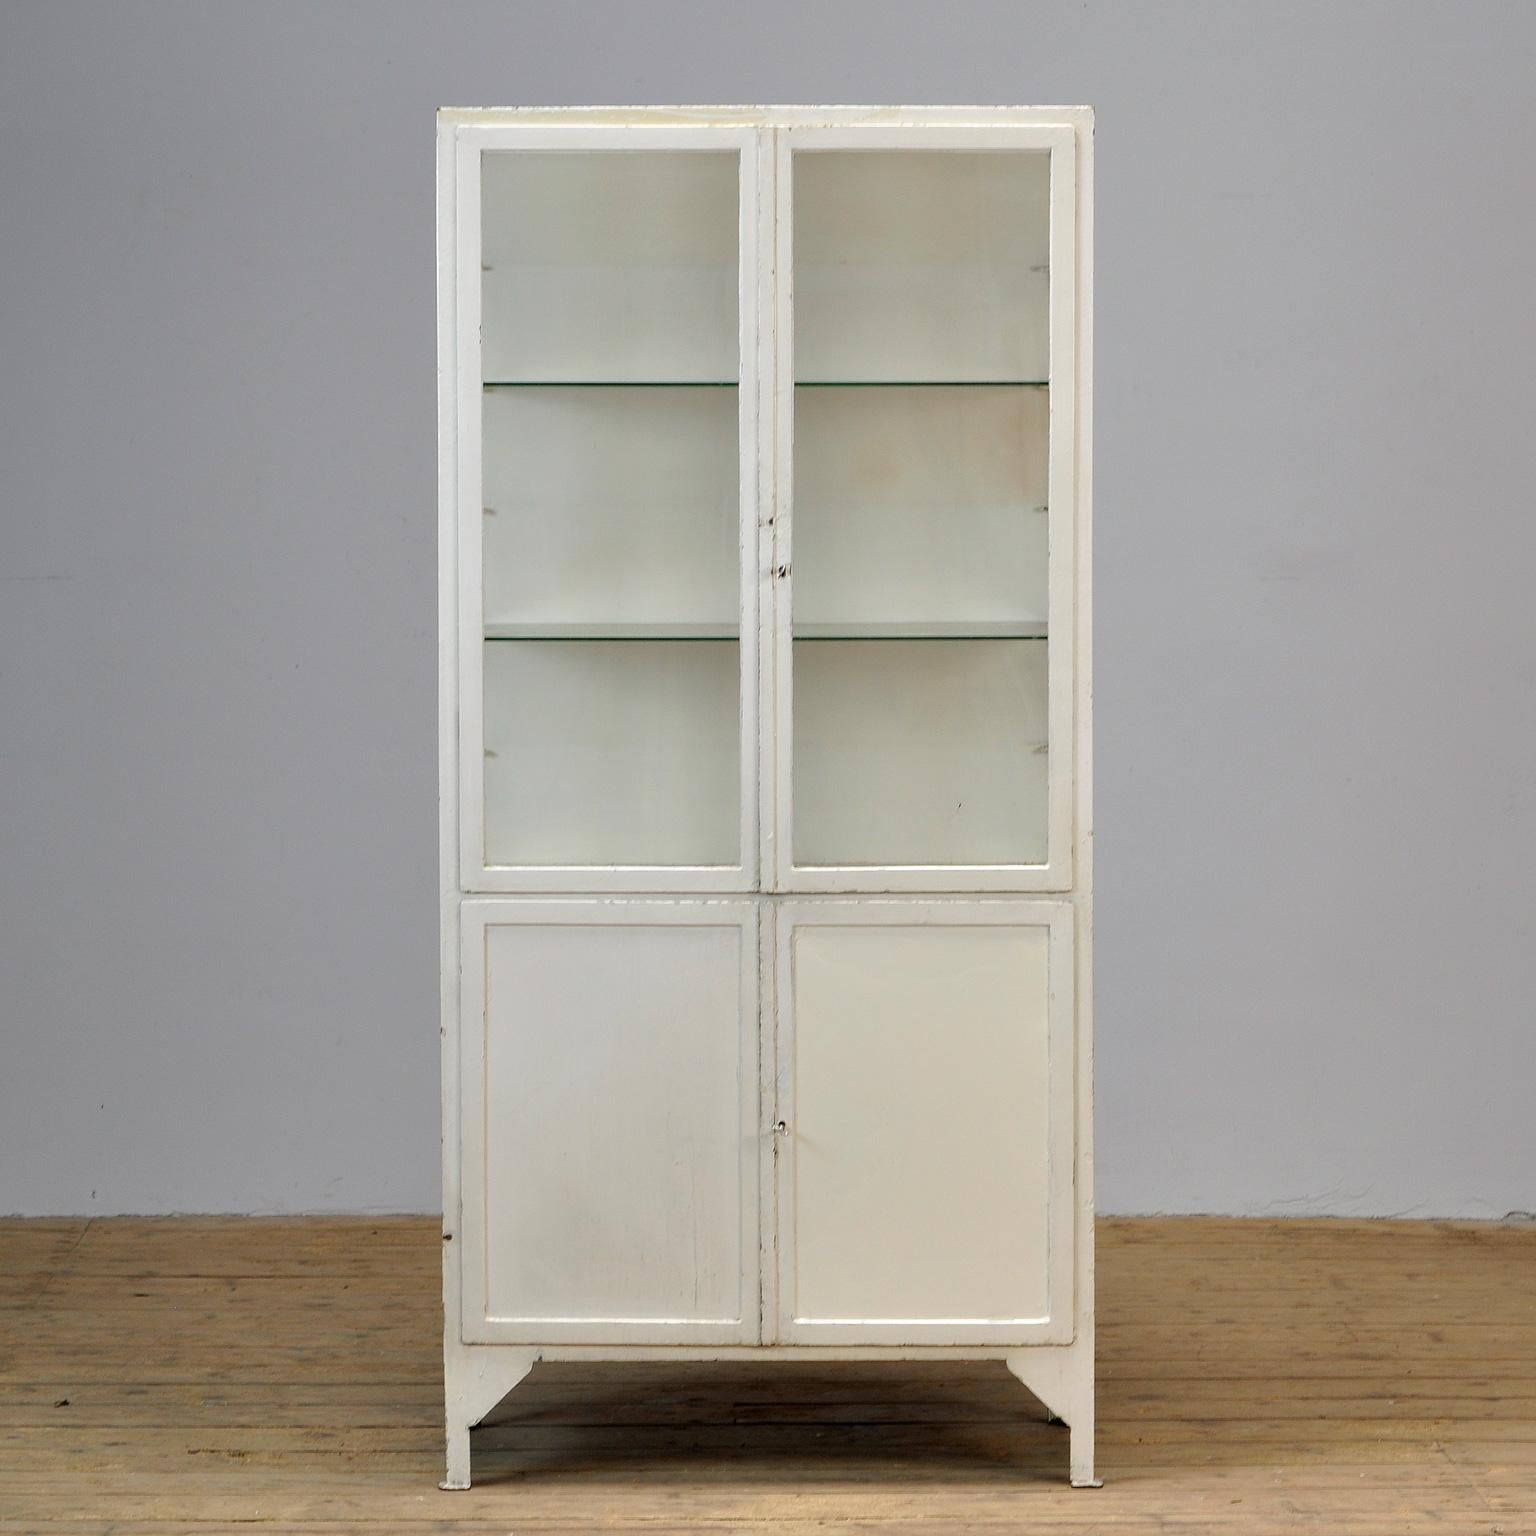 This former medical cabinet was produced in the 1930s in Hungary. It is made of thick iron and glass. In the upper part, there are two new glass shelves. The locks are in perfect working condition.
  